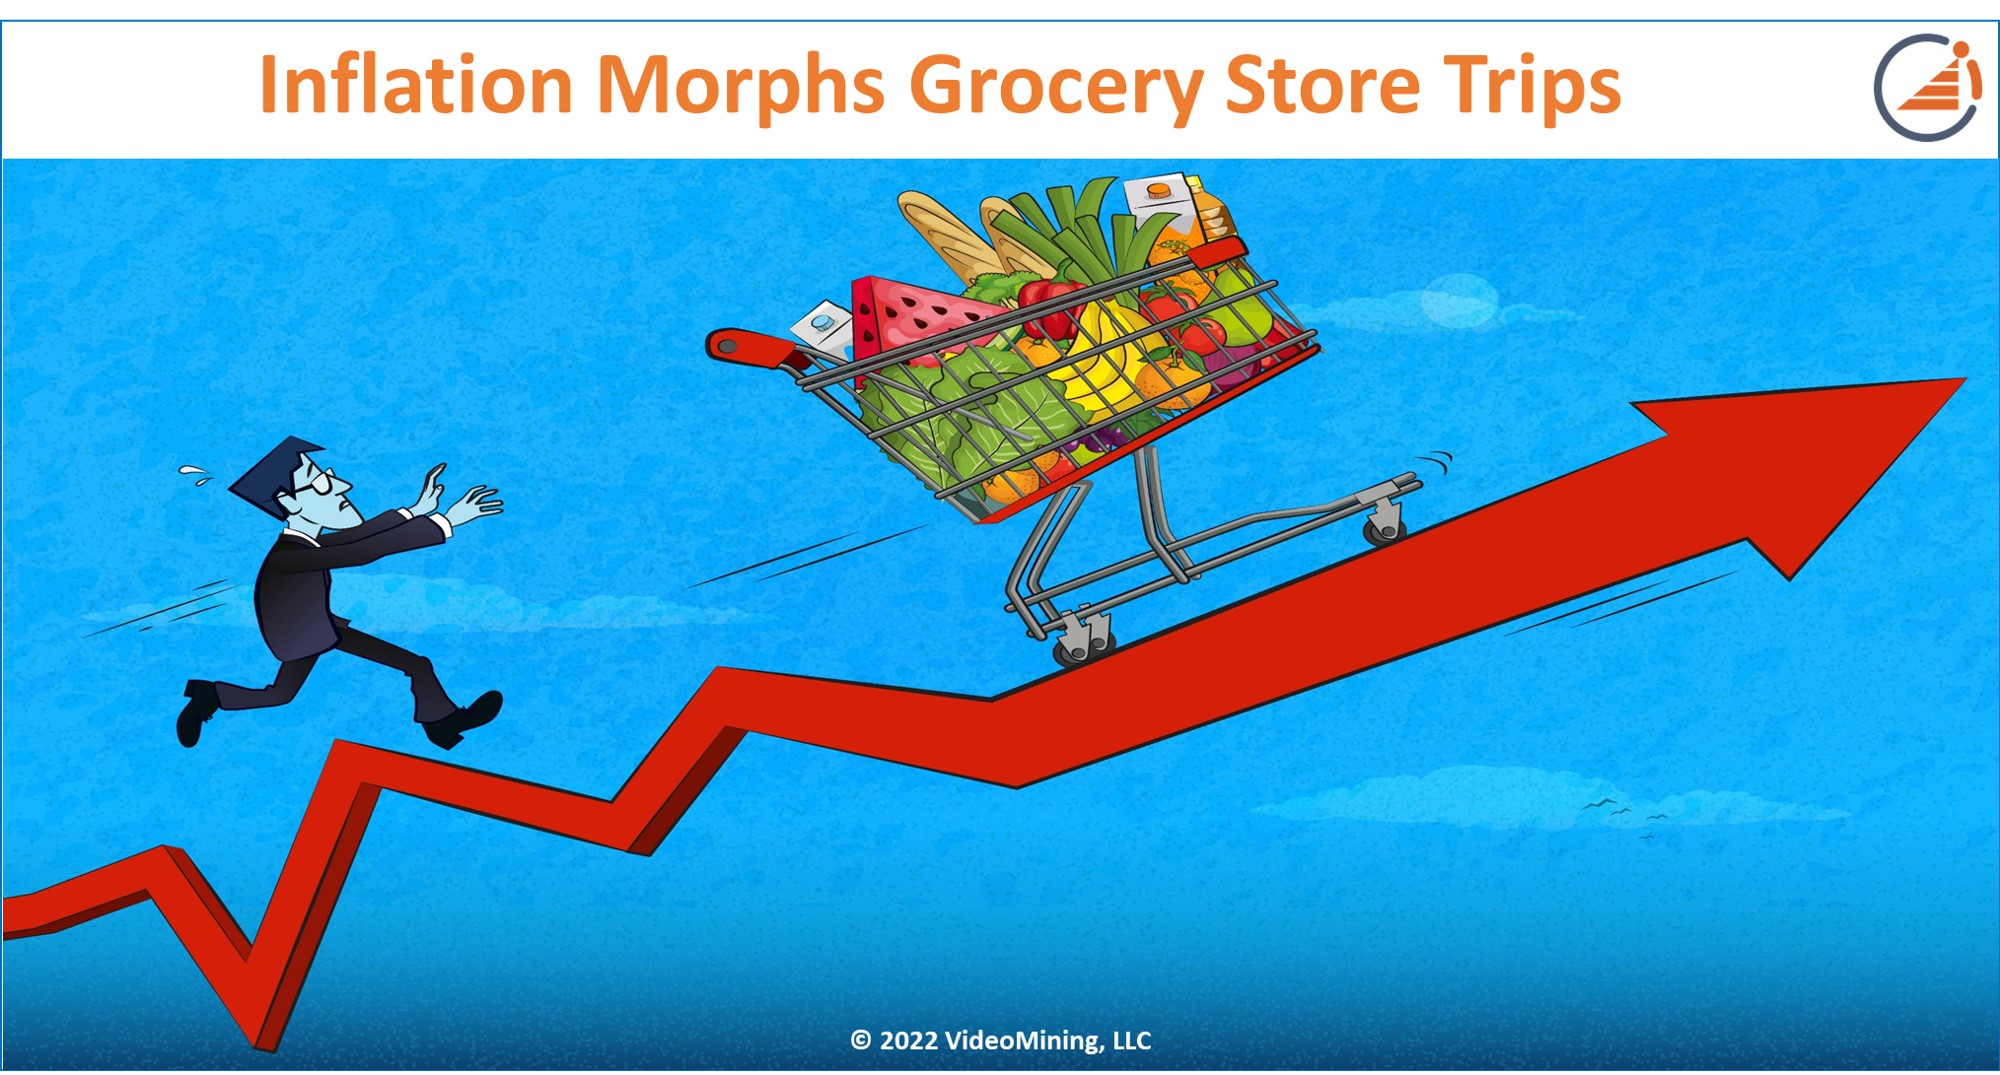 Inflation Morphs Grocery Store Trips